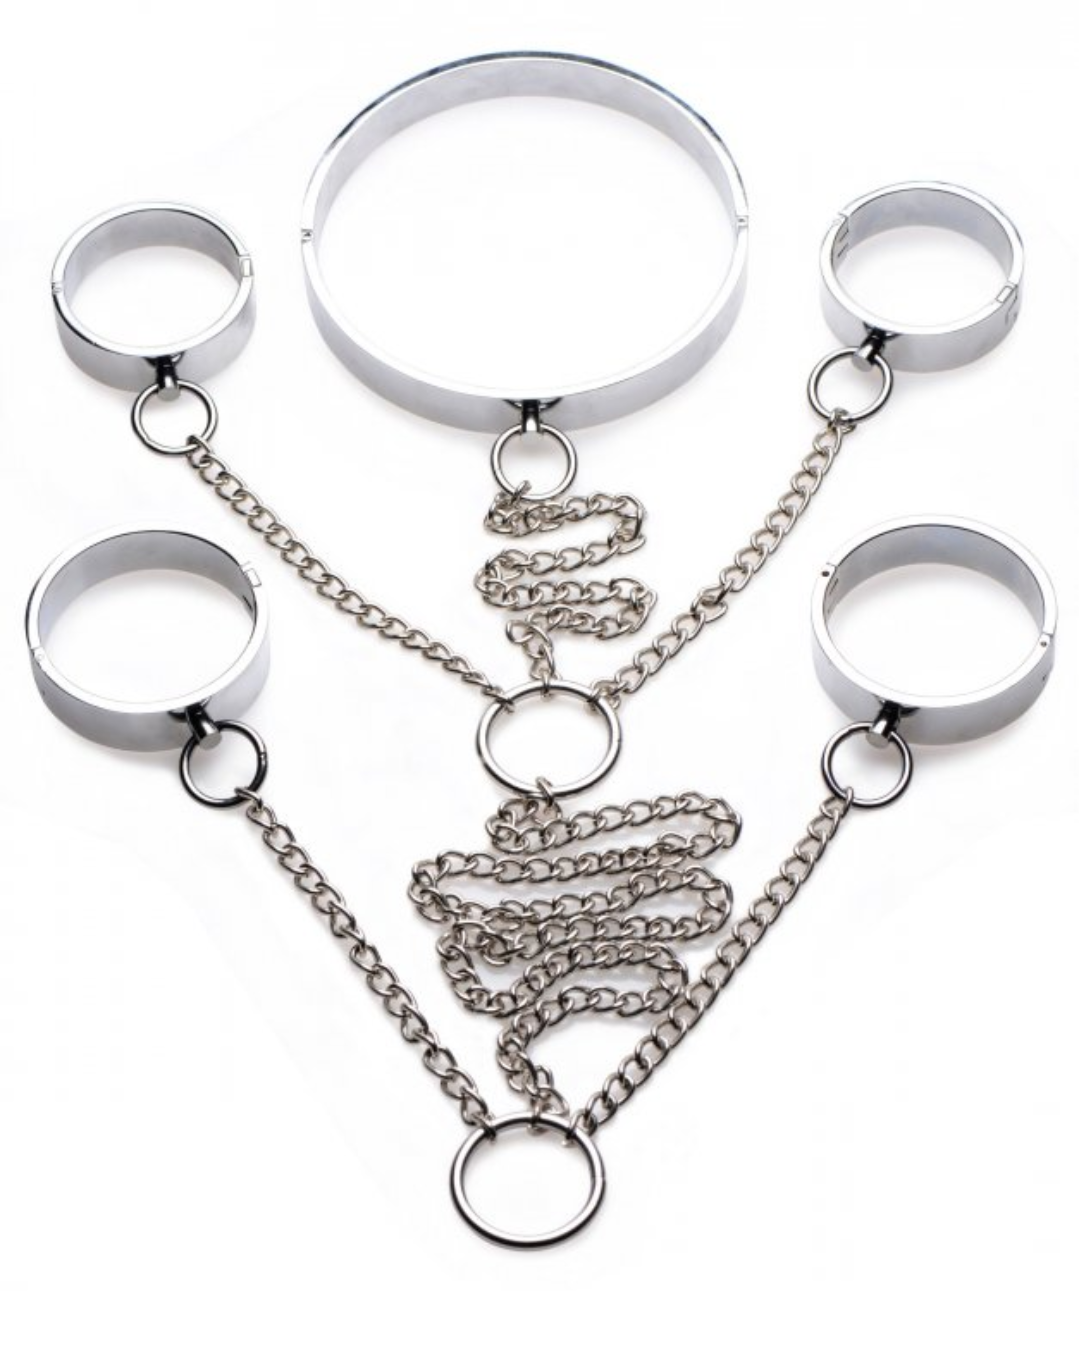 5 Piece Stainless Steel Shackle Set (Large)